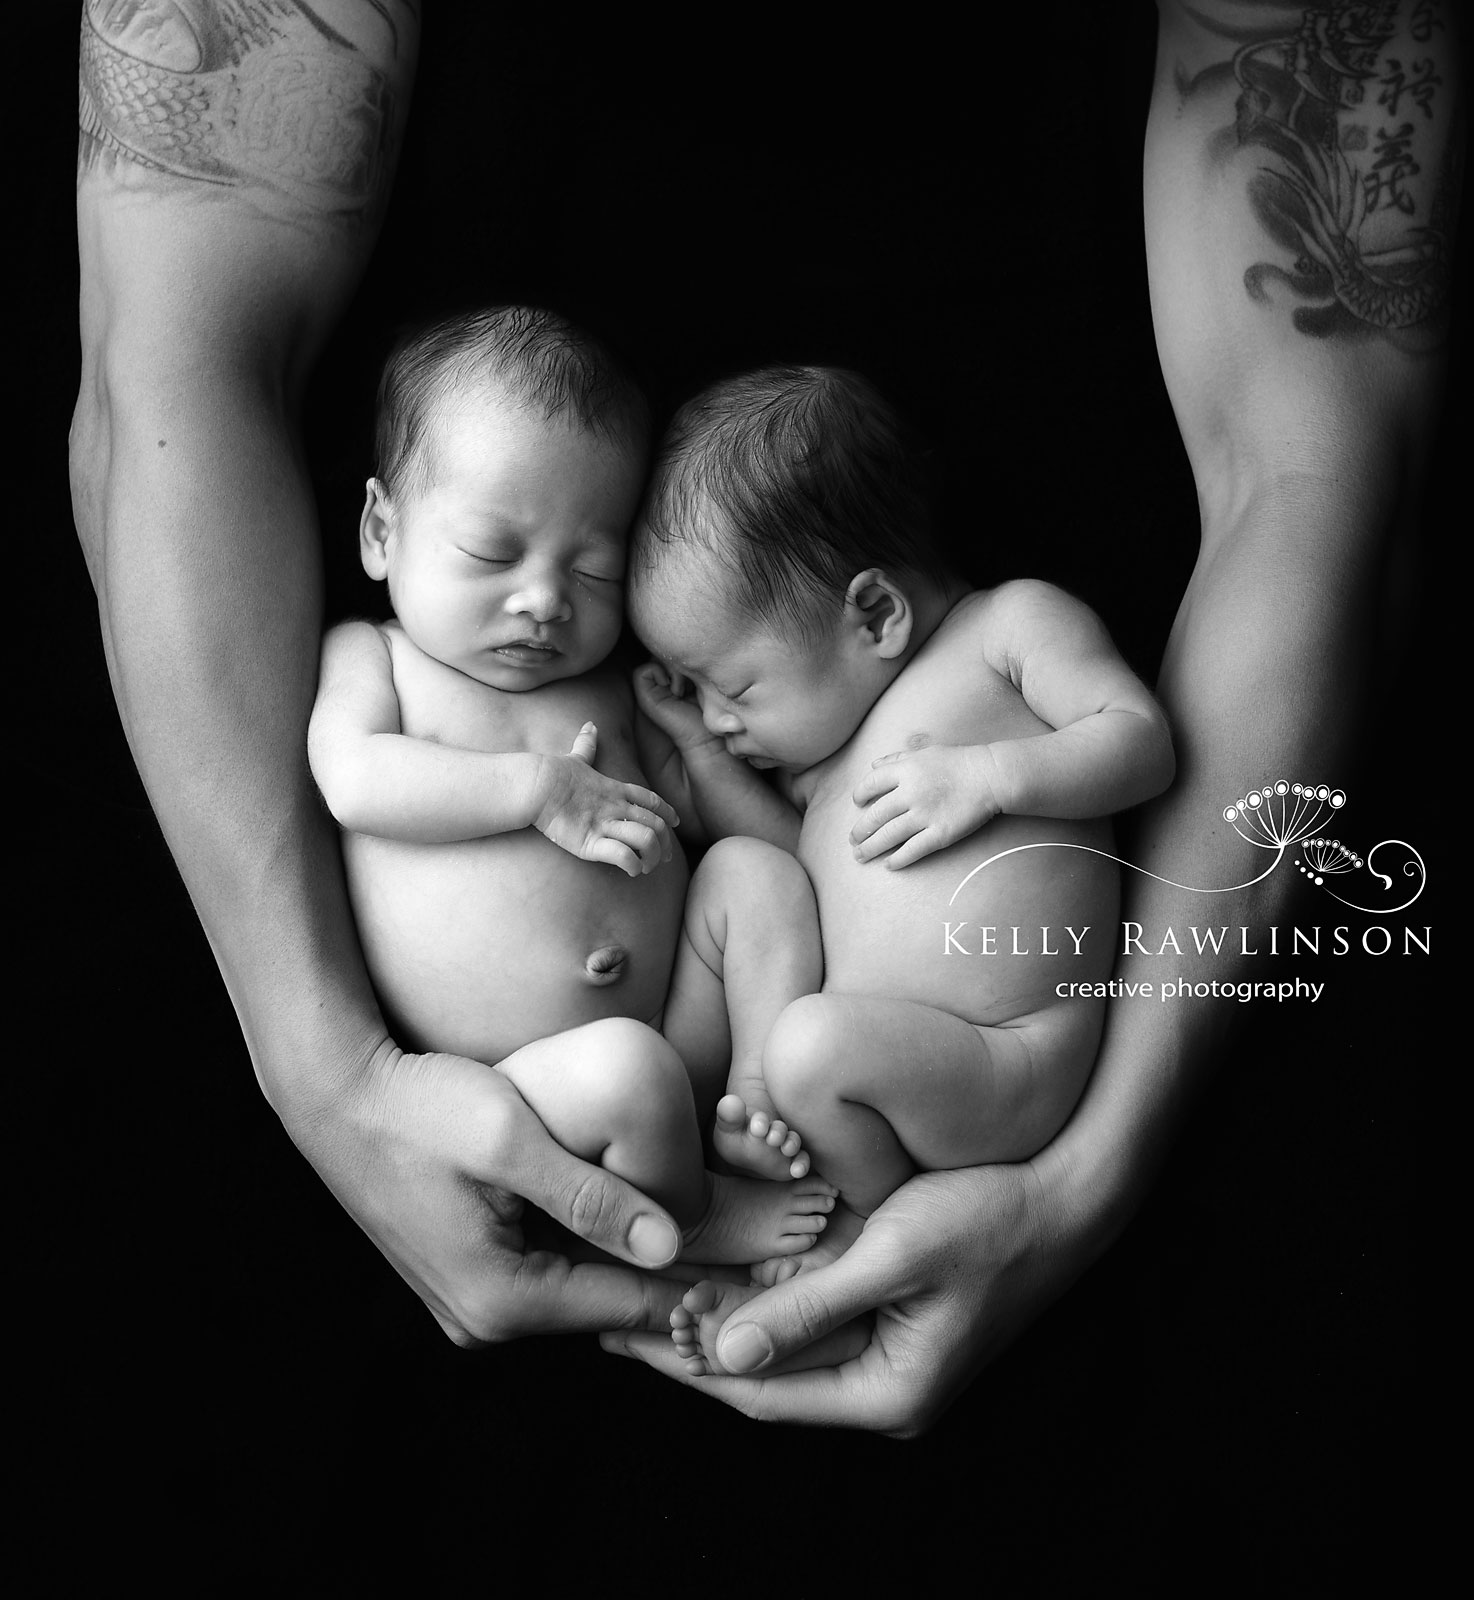 Aurora Ontario twin girls wrapped in daddy's arm, black and white photo